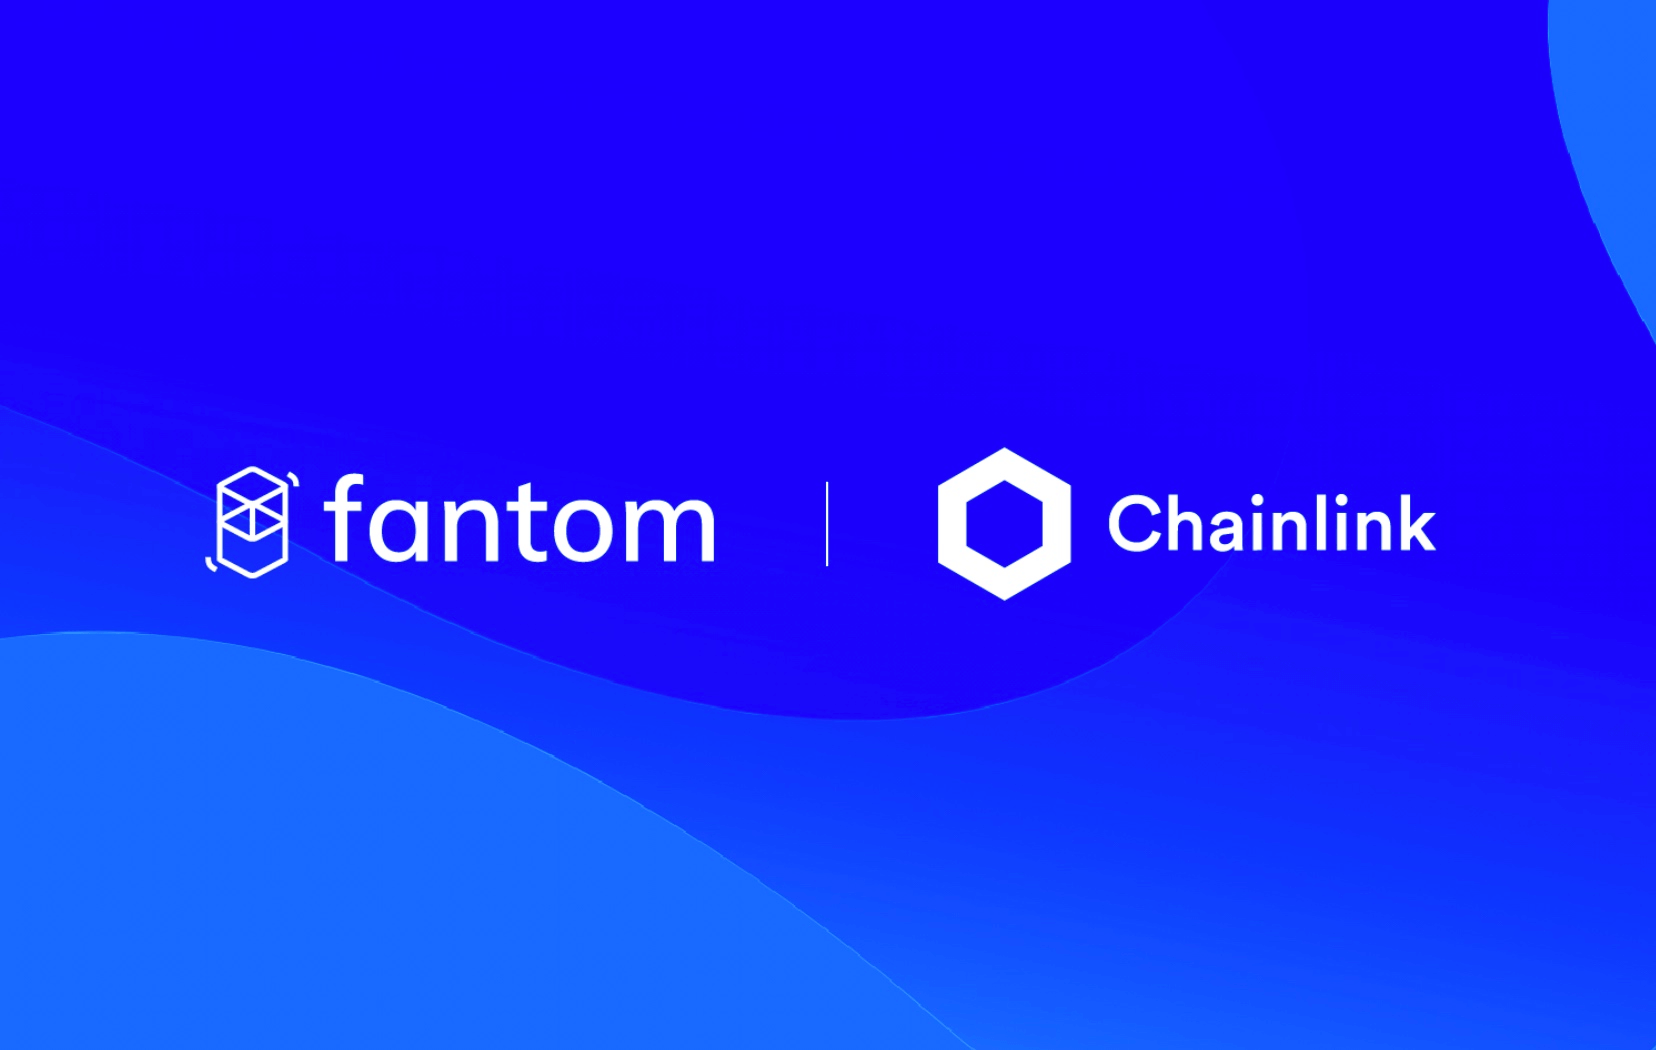 Fantom ($FTM) Partners With Chainlink ($LINK) to Give ...